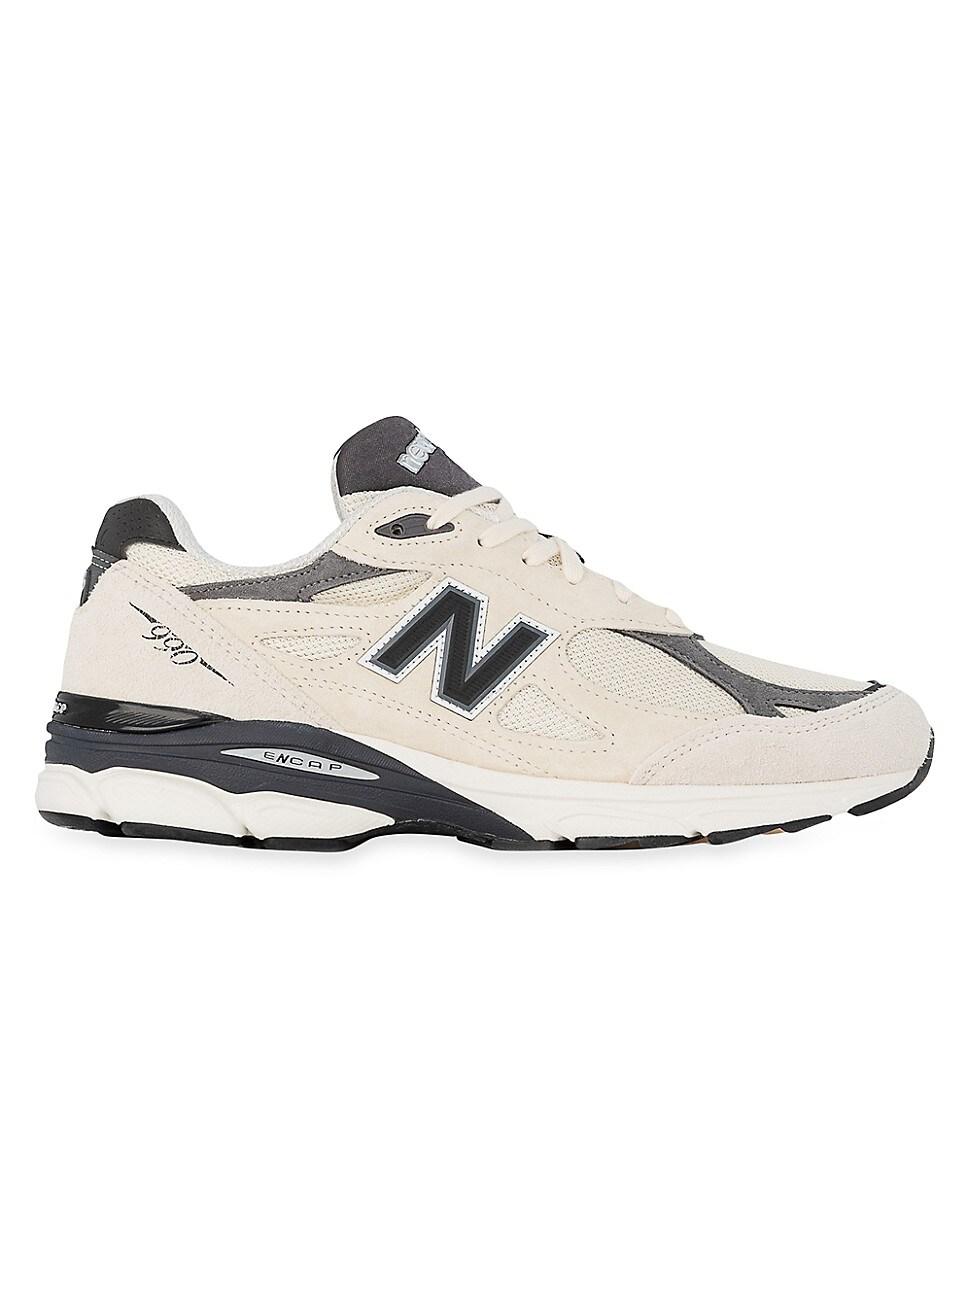 New Balance Leather 990 V3 Lace-up Sneakers in Beige (White) for Men | Lyst